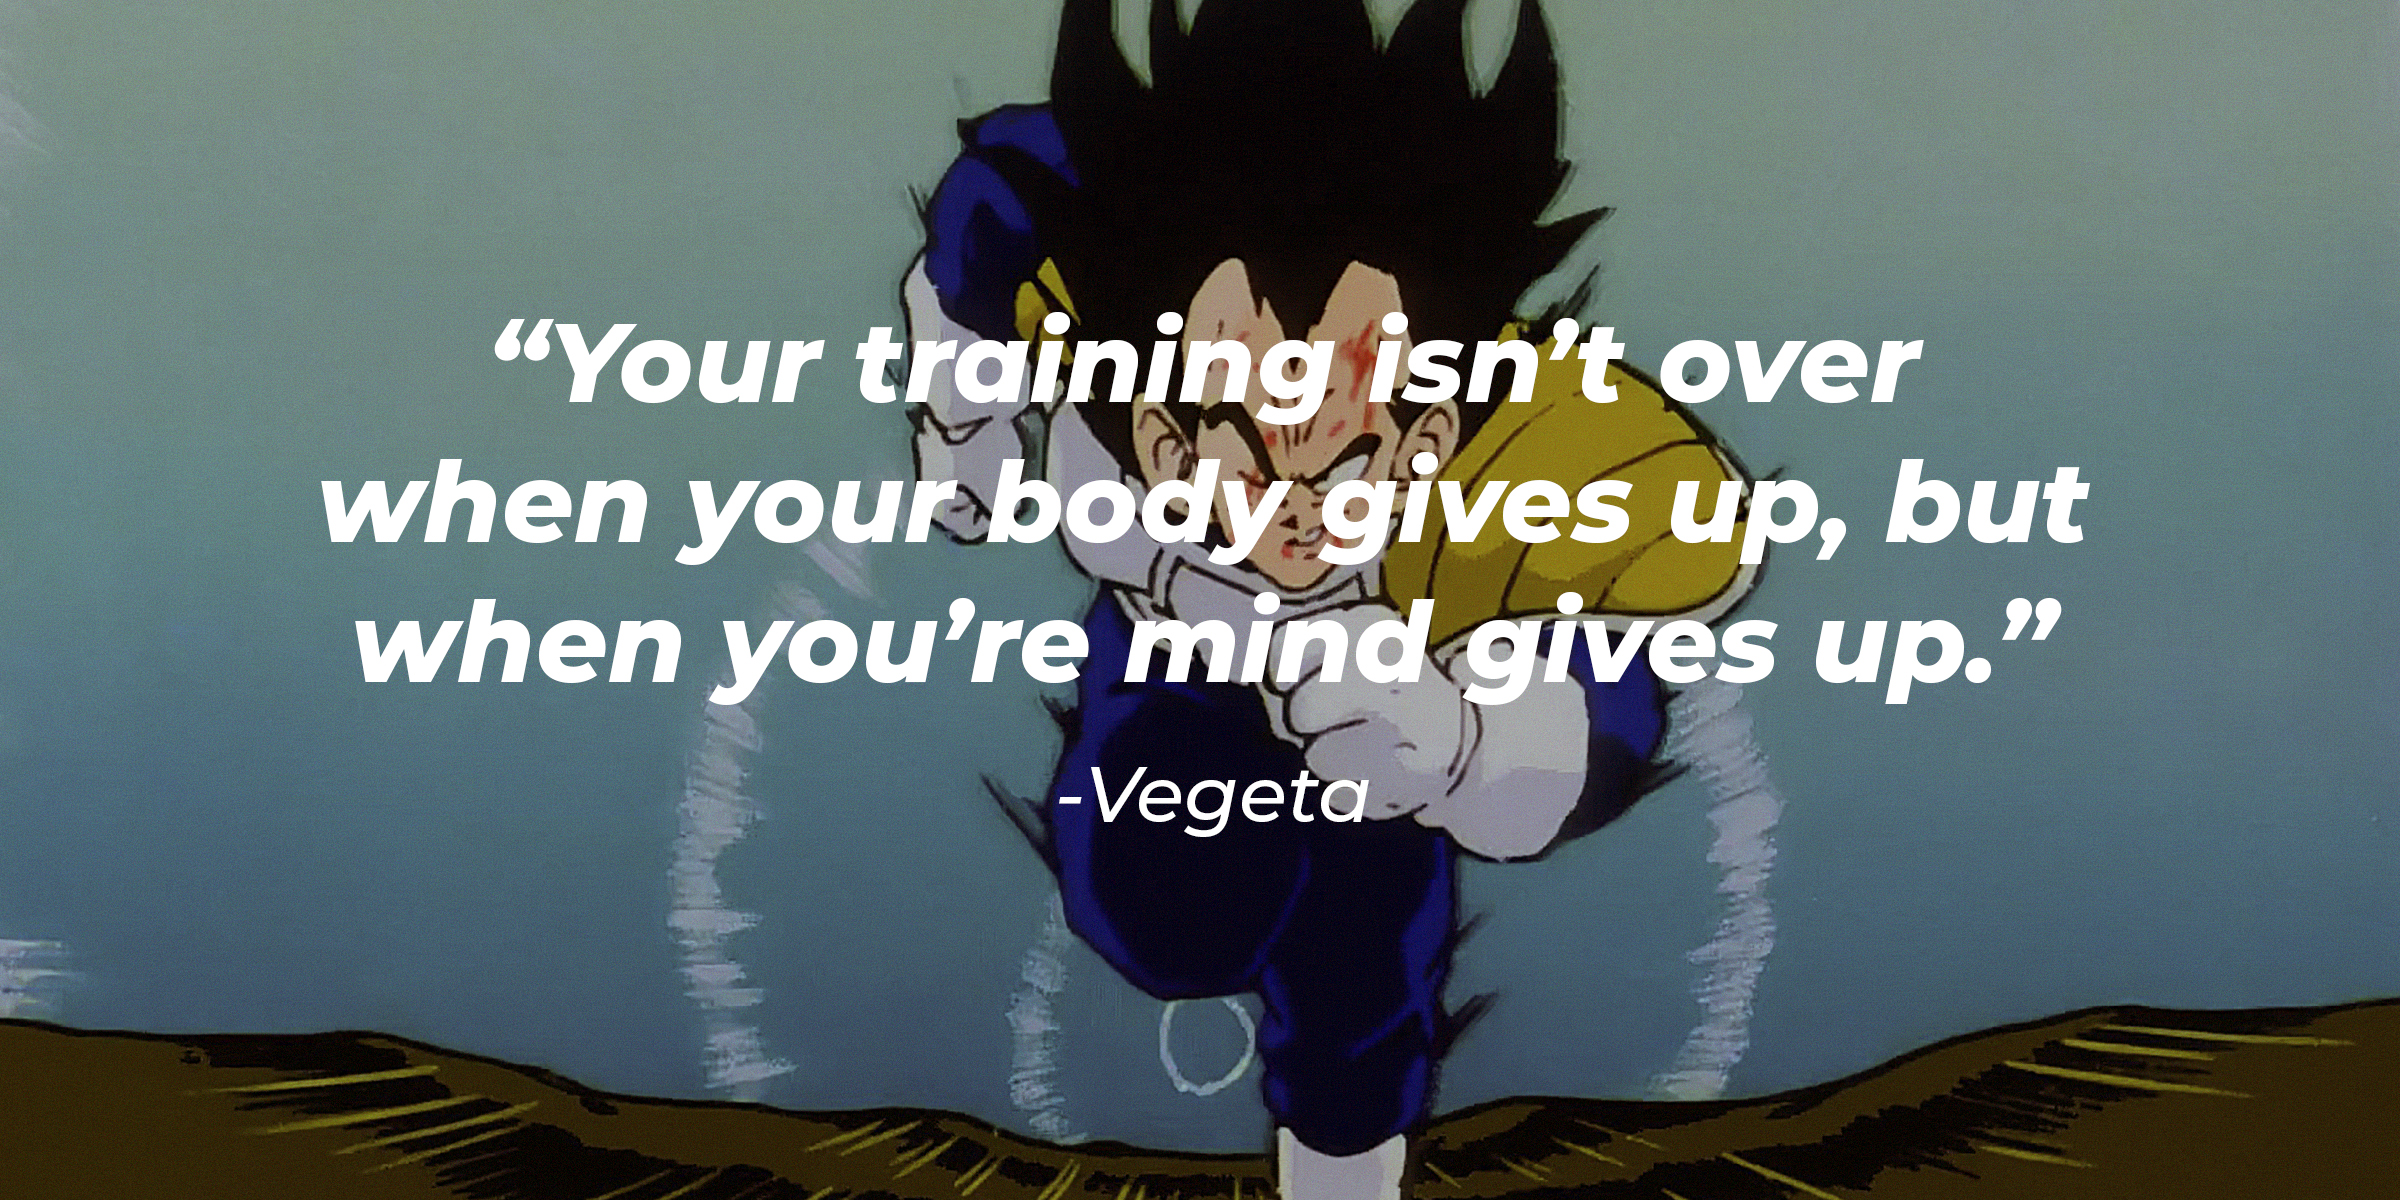 Vegeta, with his quote: "Your training isn’t over when your body gives up, but when you’re mind gives up." | Source: facebook.com/DragonBallZ